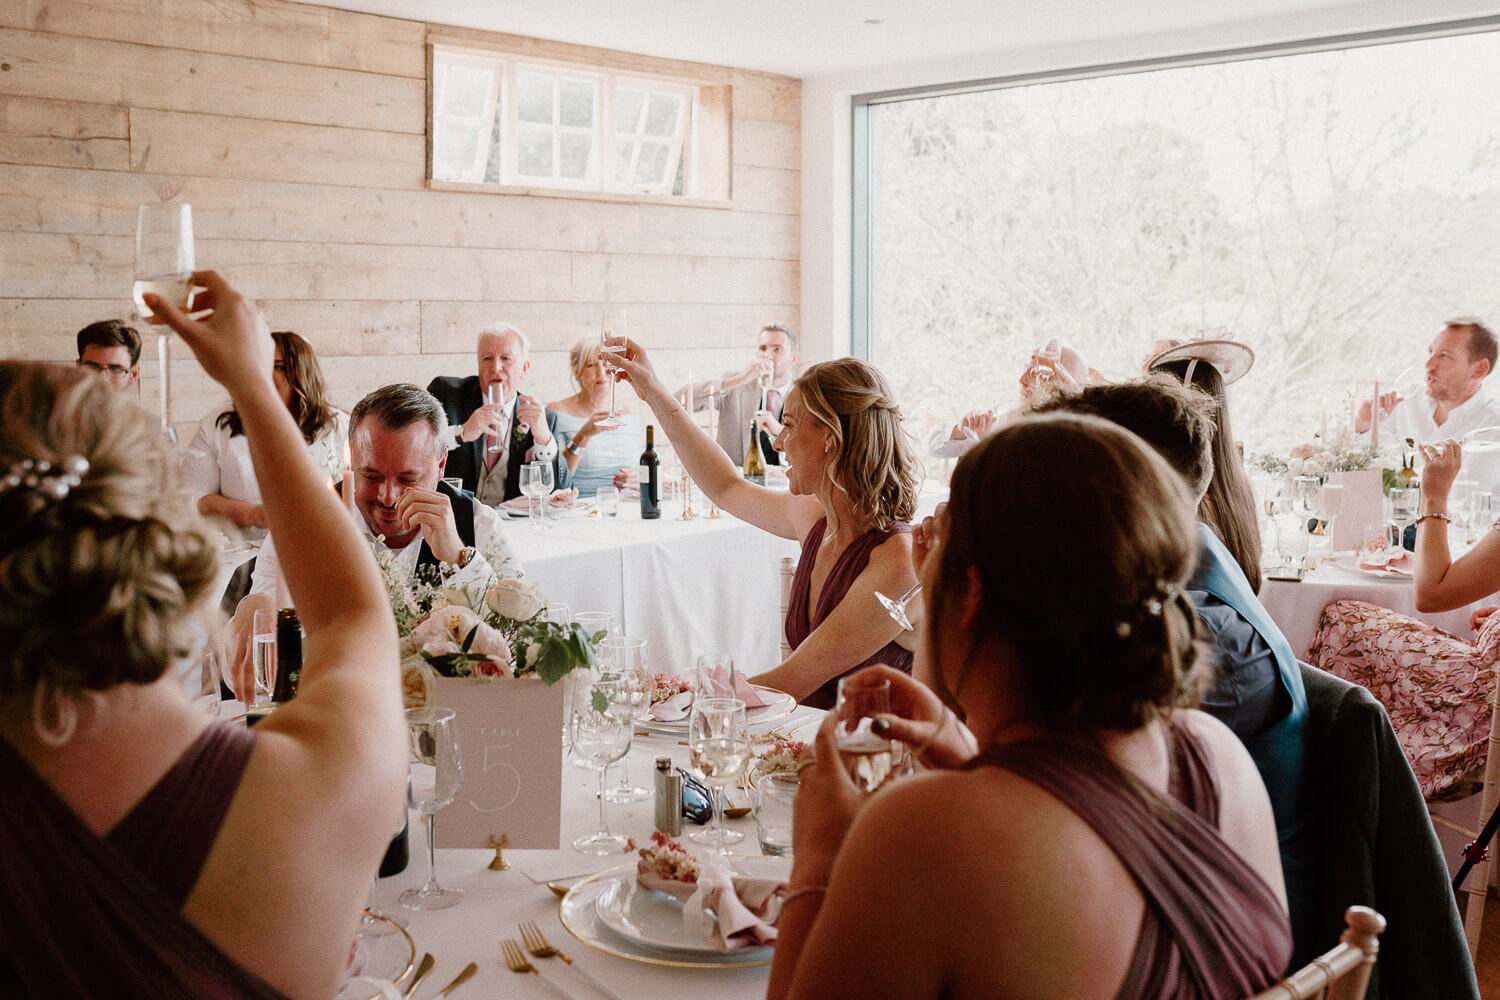 Wedding guests toast the bride and groom at Kingston Estate, Devon.